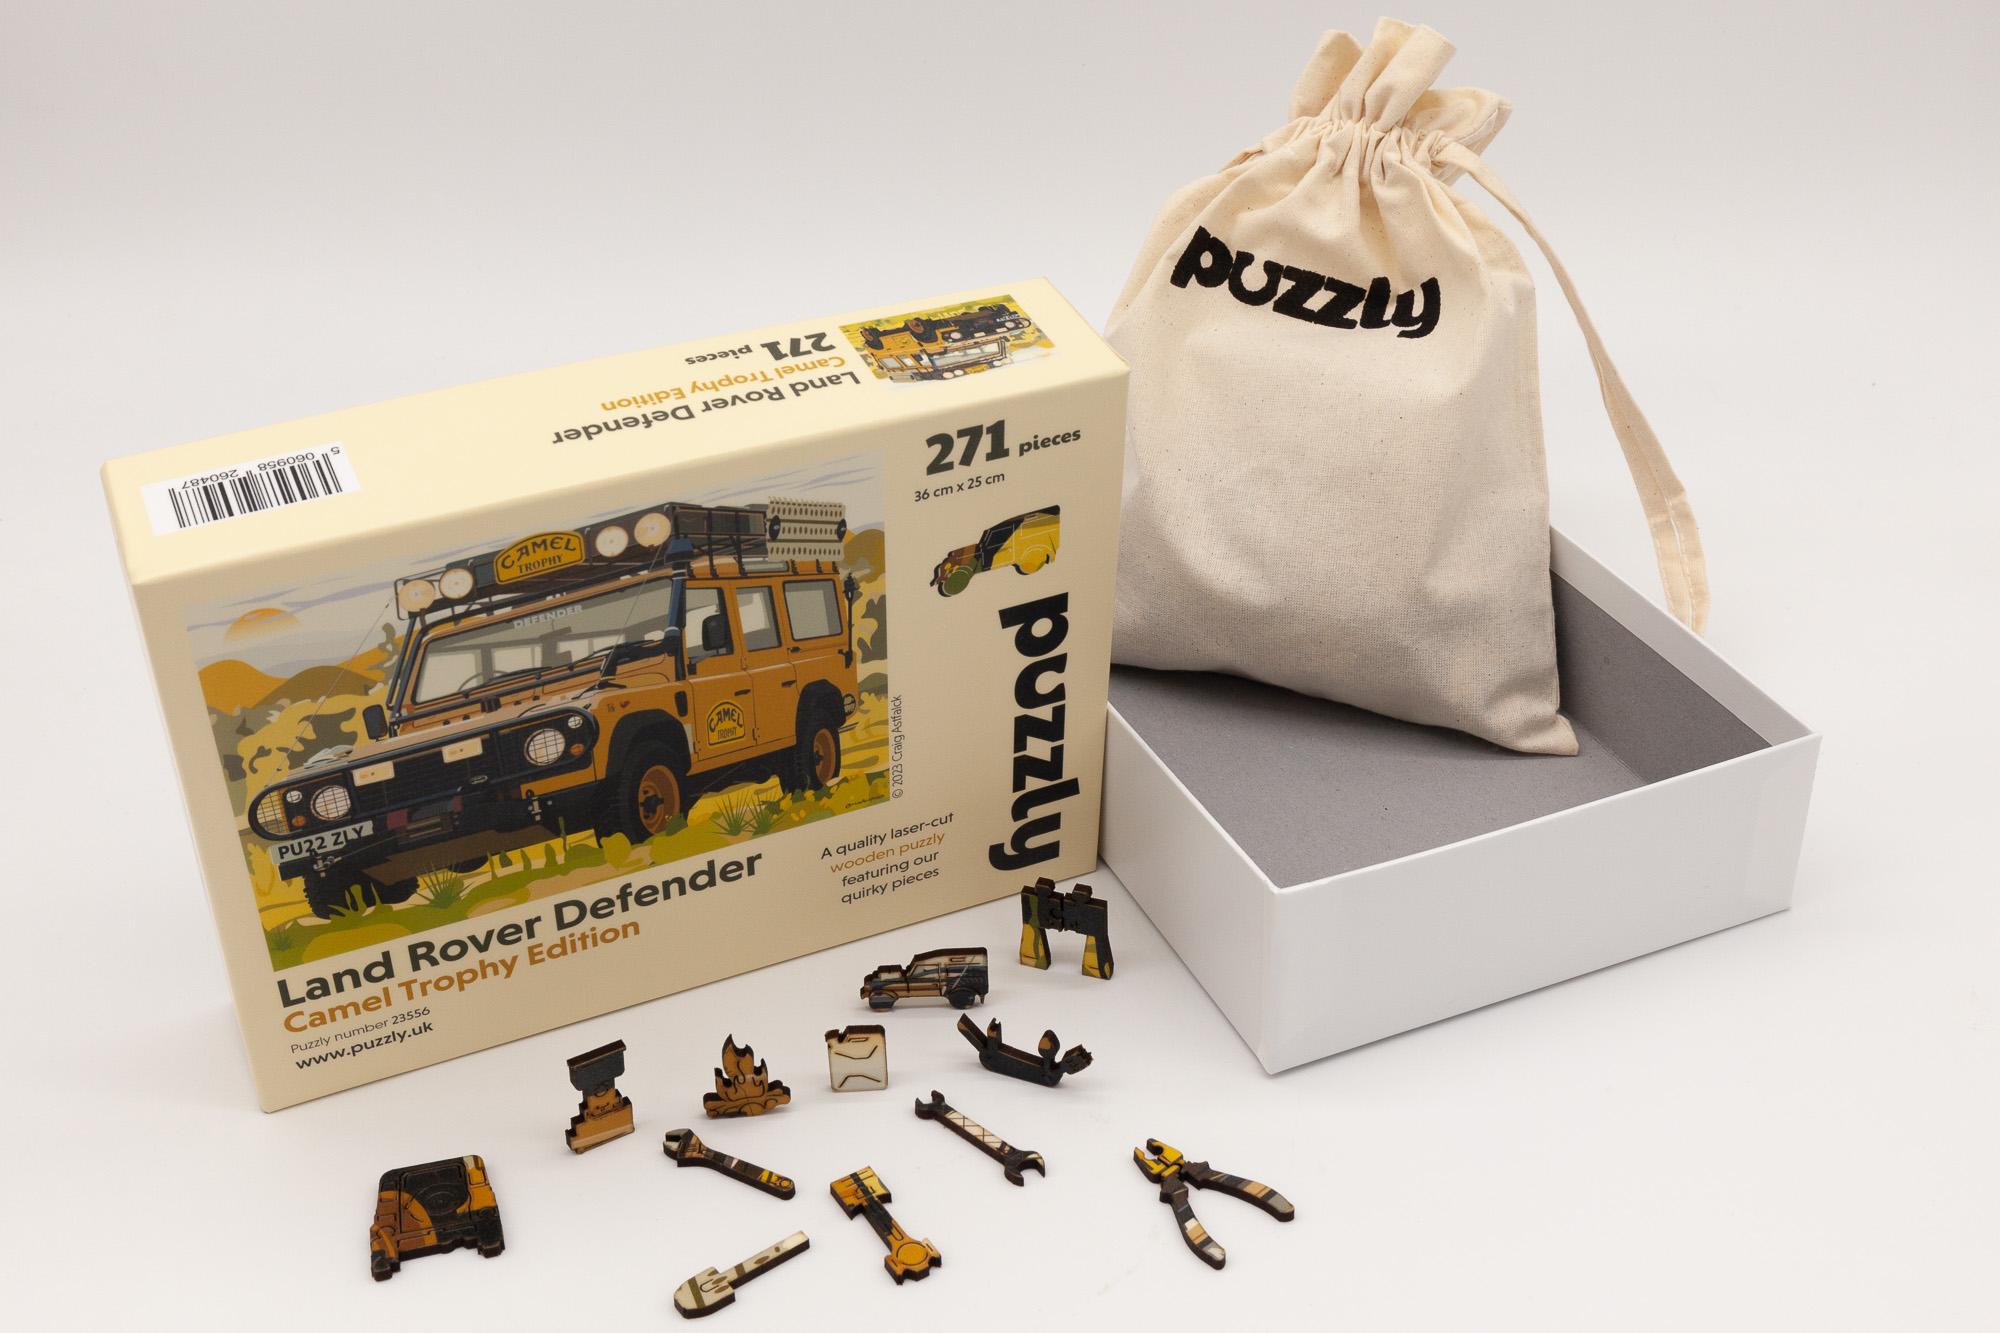 Land Rover Defender Wooden Puzzle